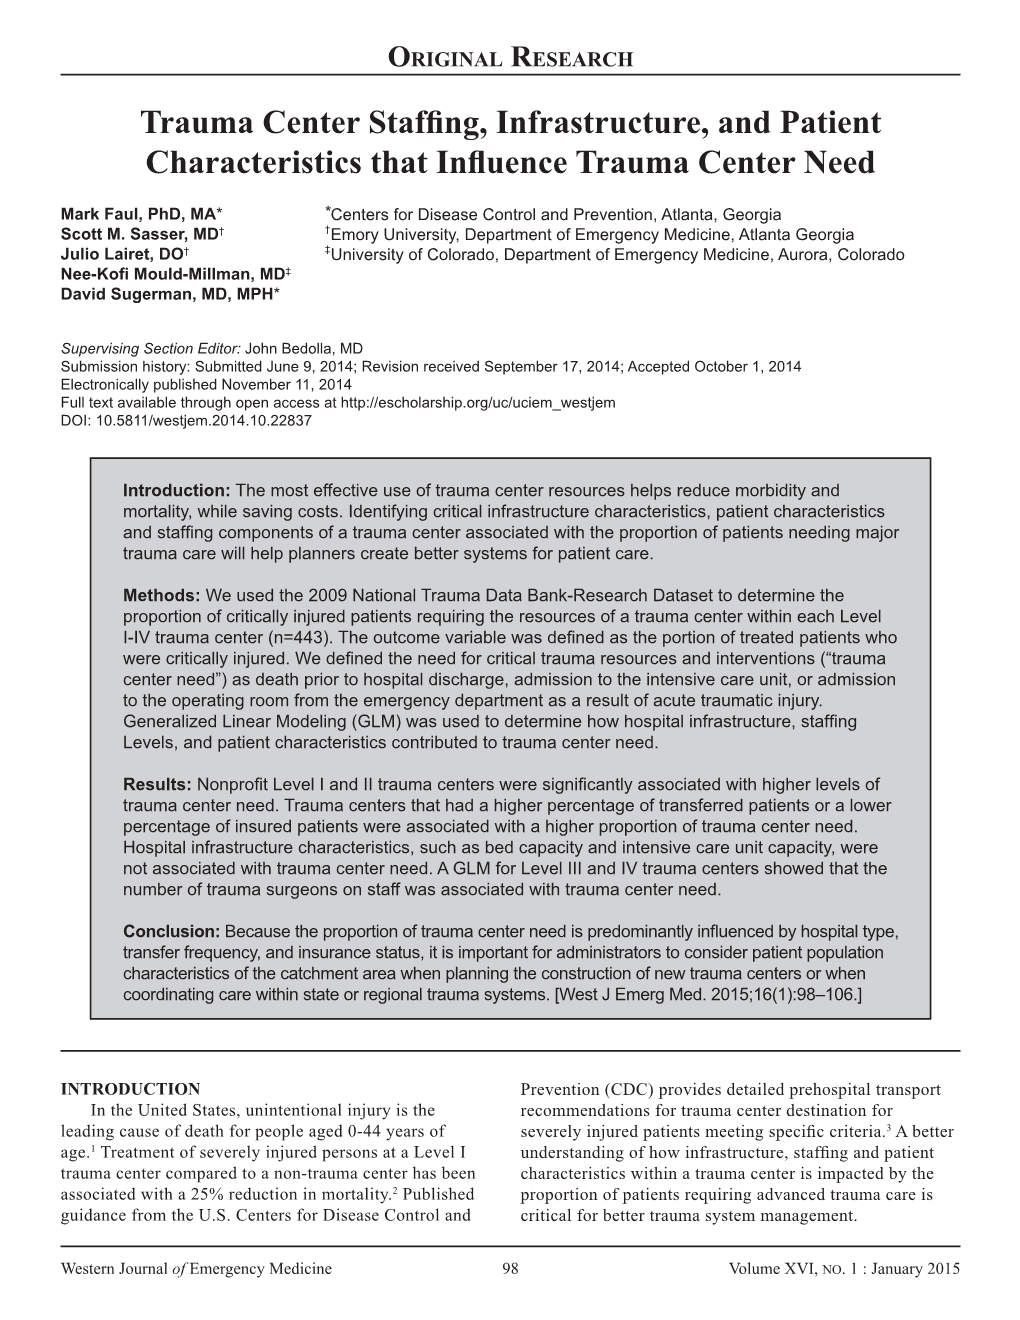 Trauma Center Staffing, Infrastructure, and Patient Characteristics That Influence Trauma Center Need